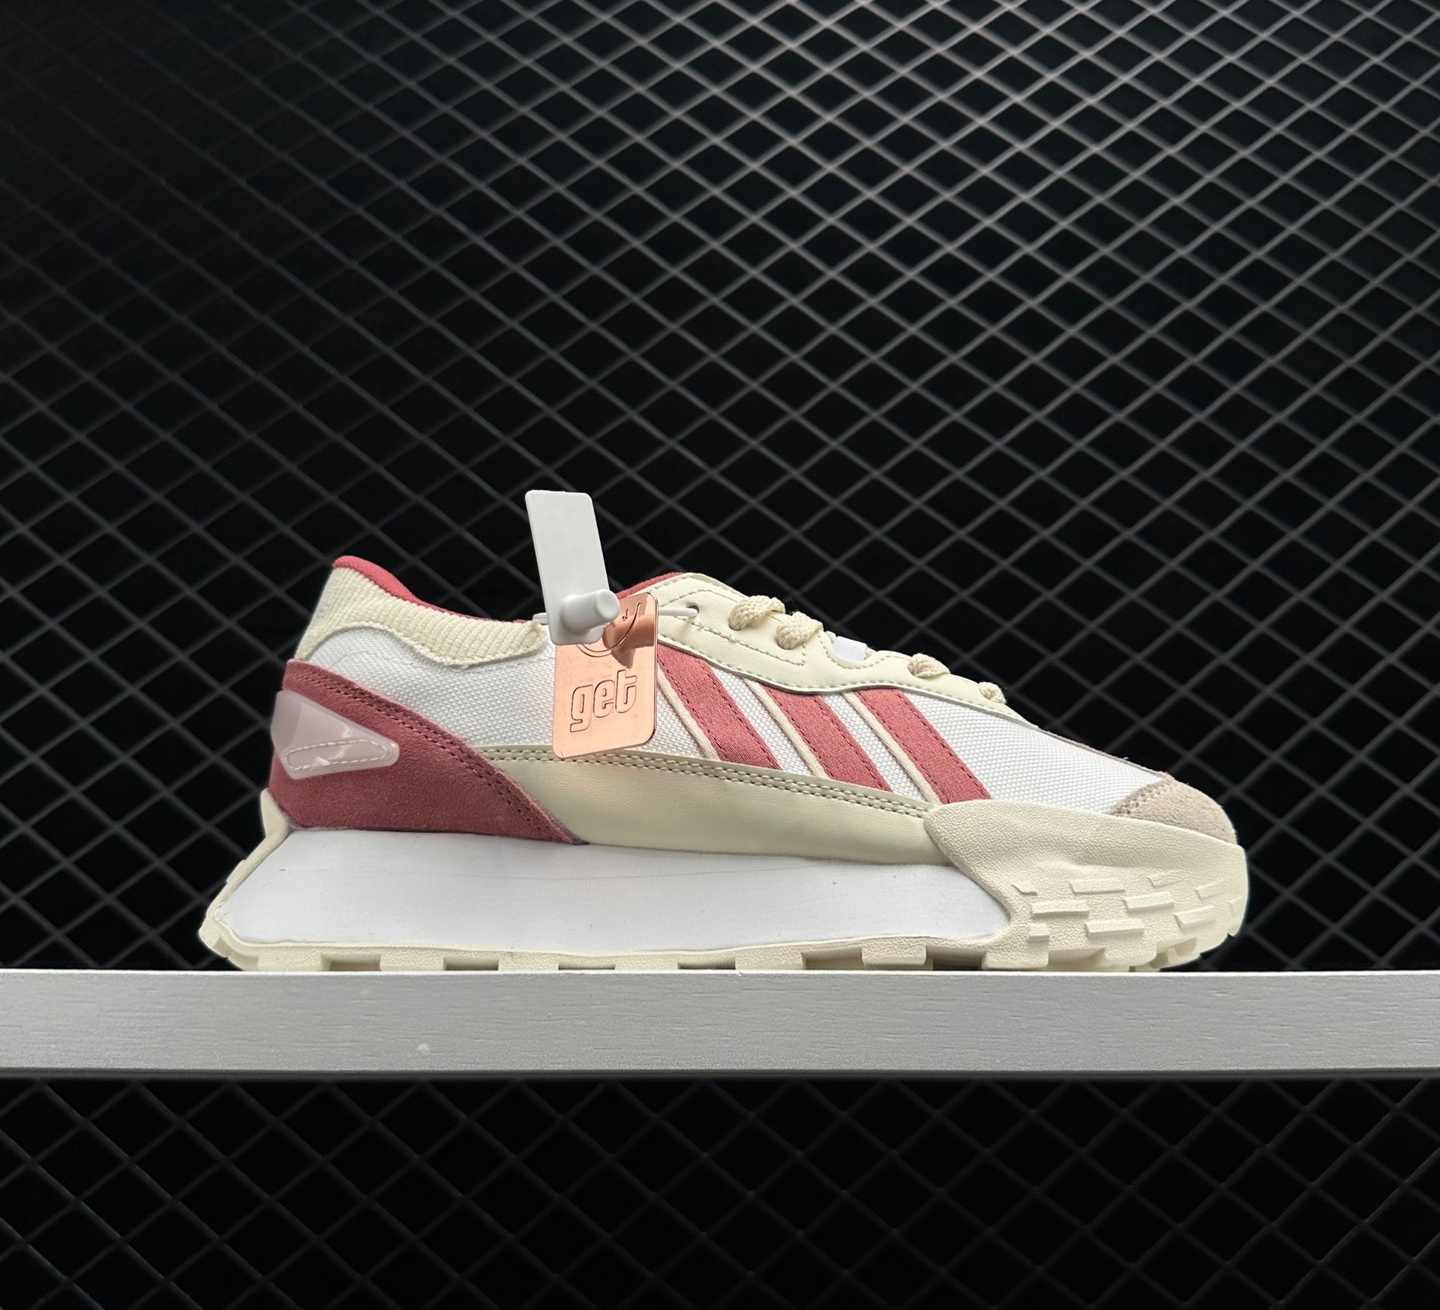 Adidas Futro Mixr NEO Pink Red Cream White GY4725 - Stylish and Vibrant Sneakers